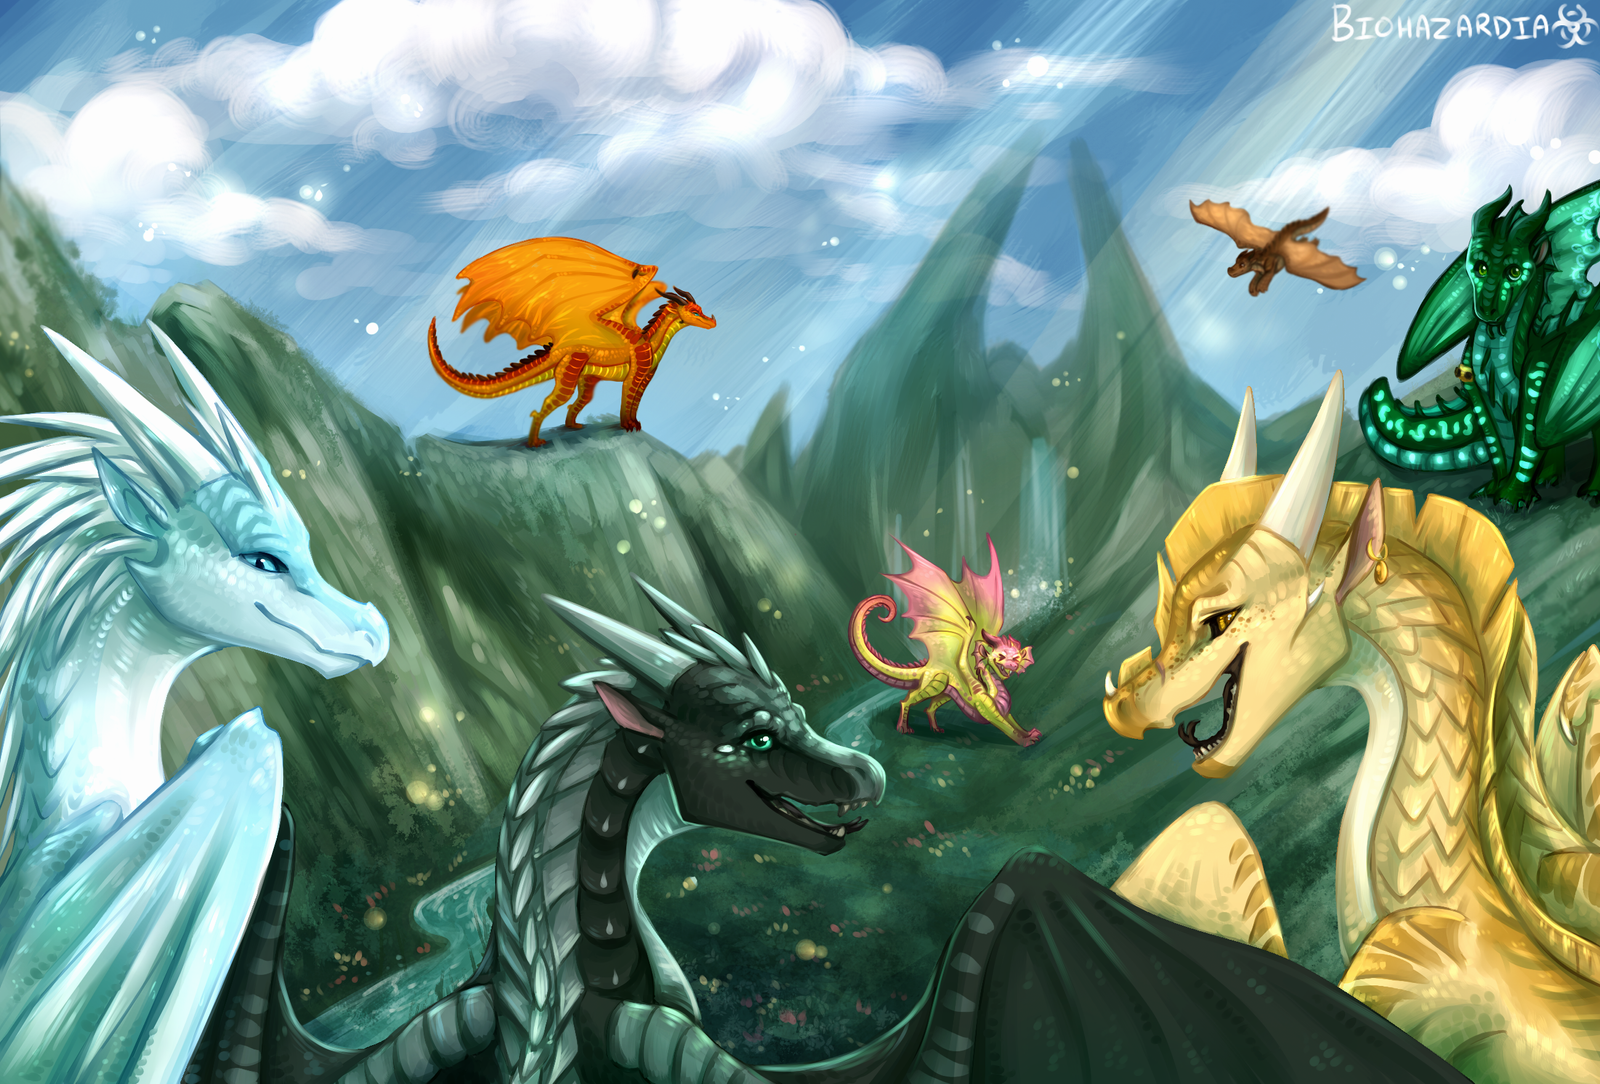 Wings of Fire Wallpapers on WallpaperDog